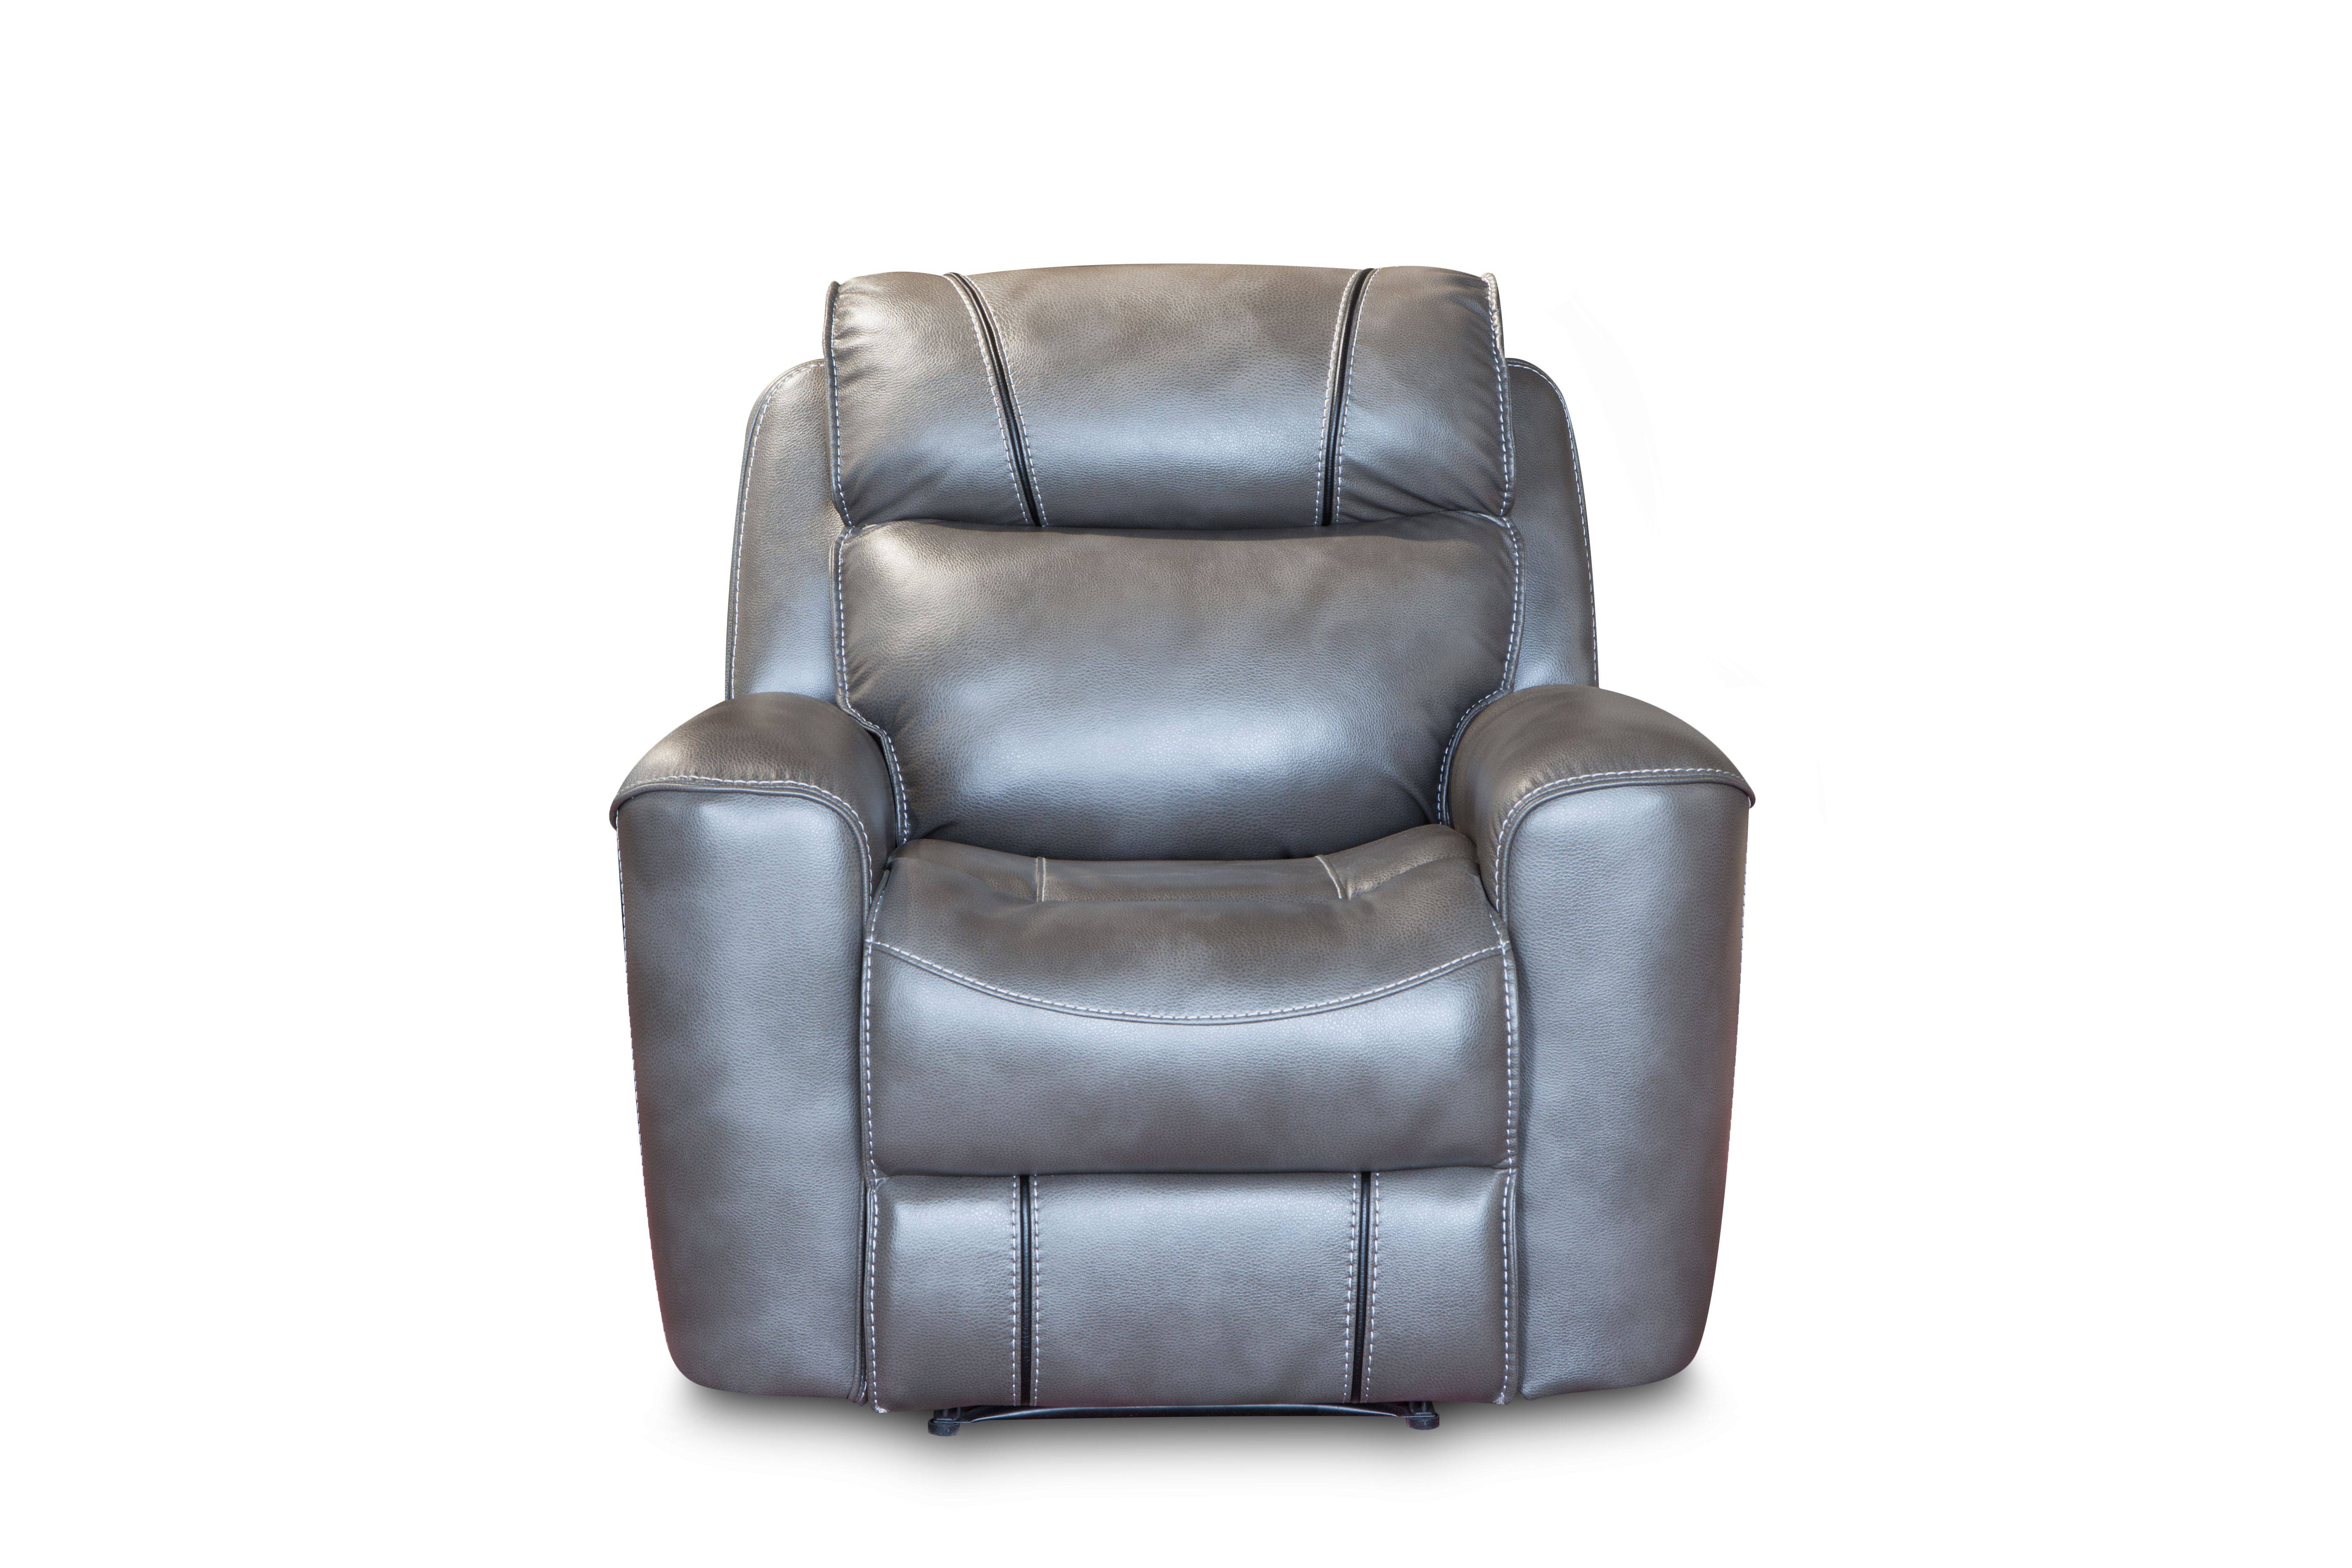 Modern furniture living room leather power american recliner sofa